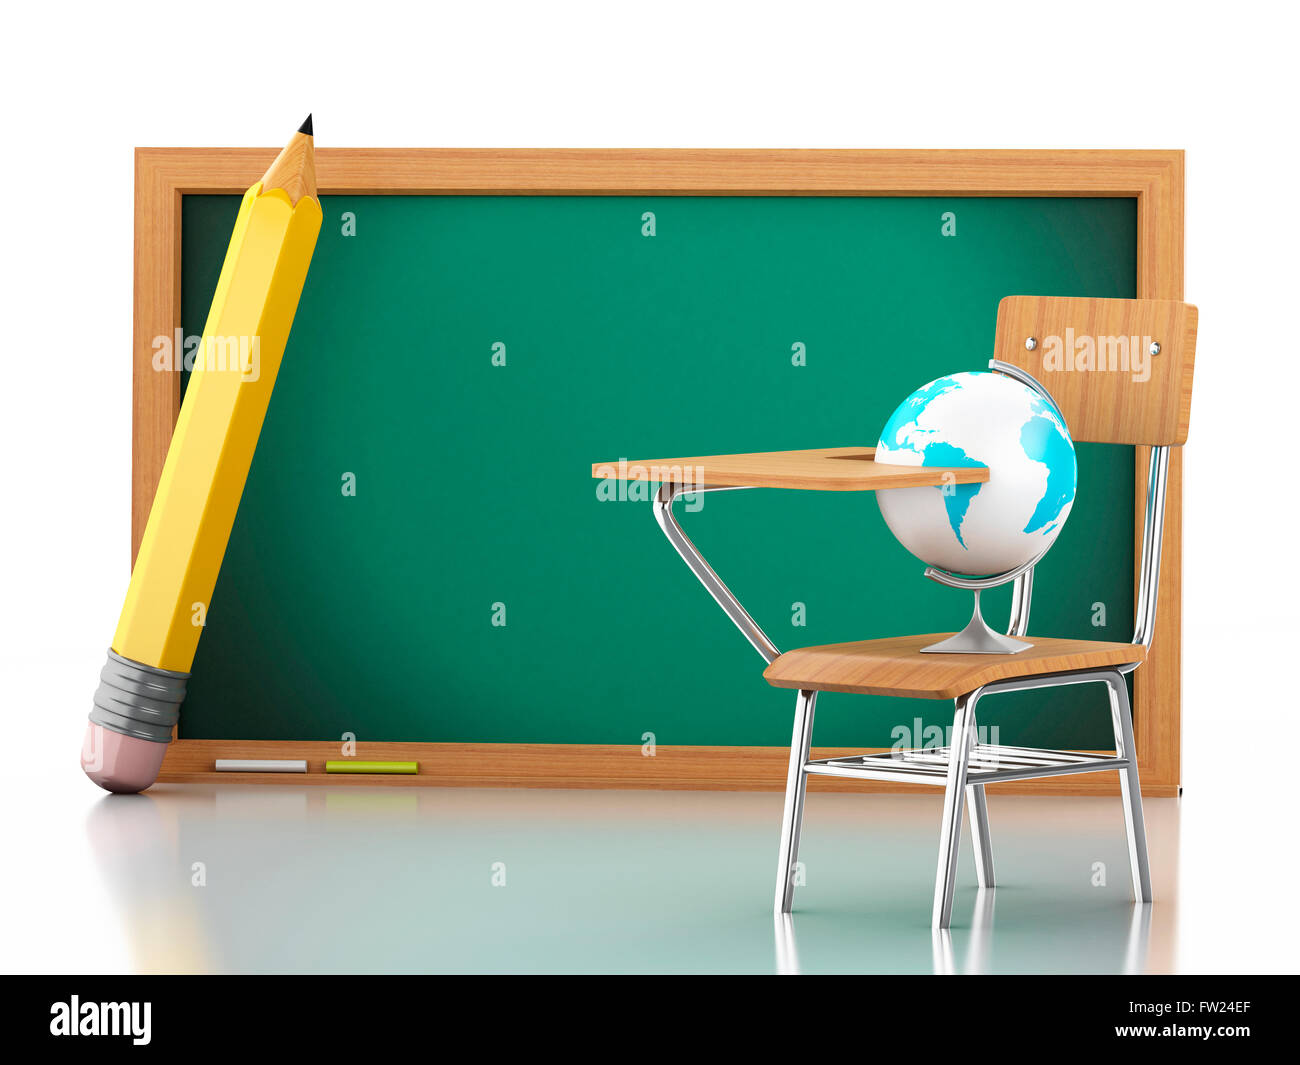 3D Illustration. White people with school desk, globe and blackboard. Education concept. Isolated white background. Stock Photo